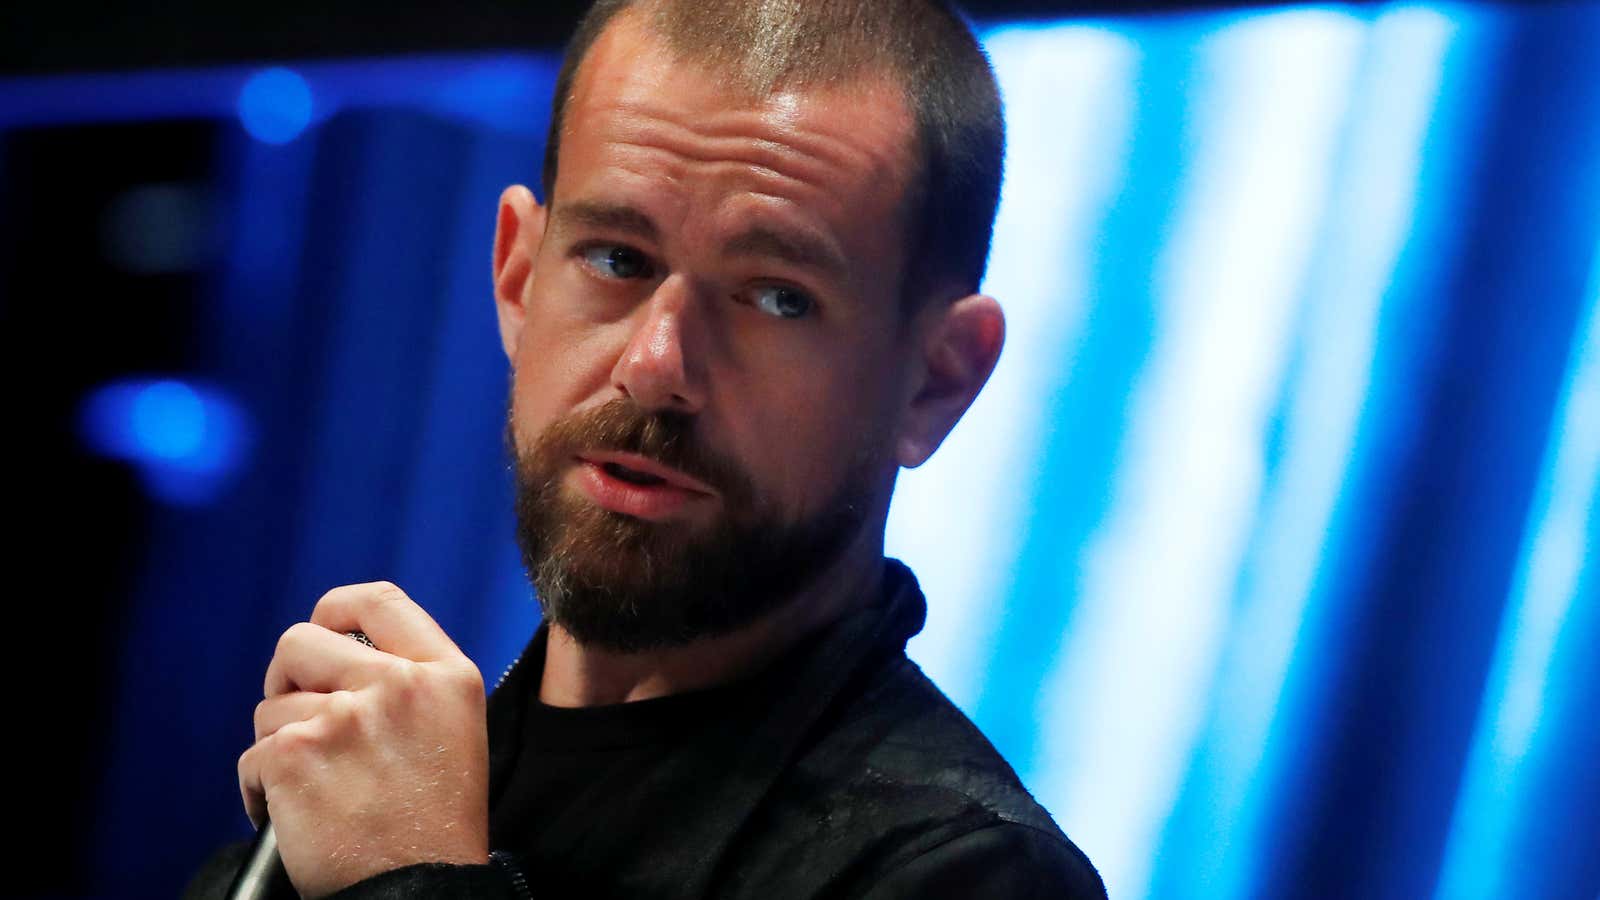 Who will give Jack Dorsey an open decentralized standard for social media?
